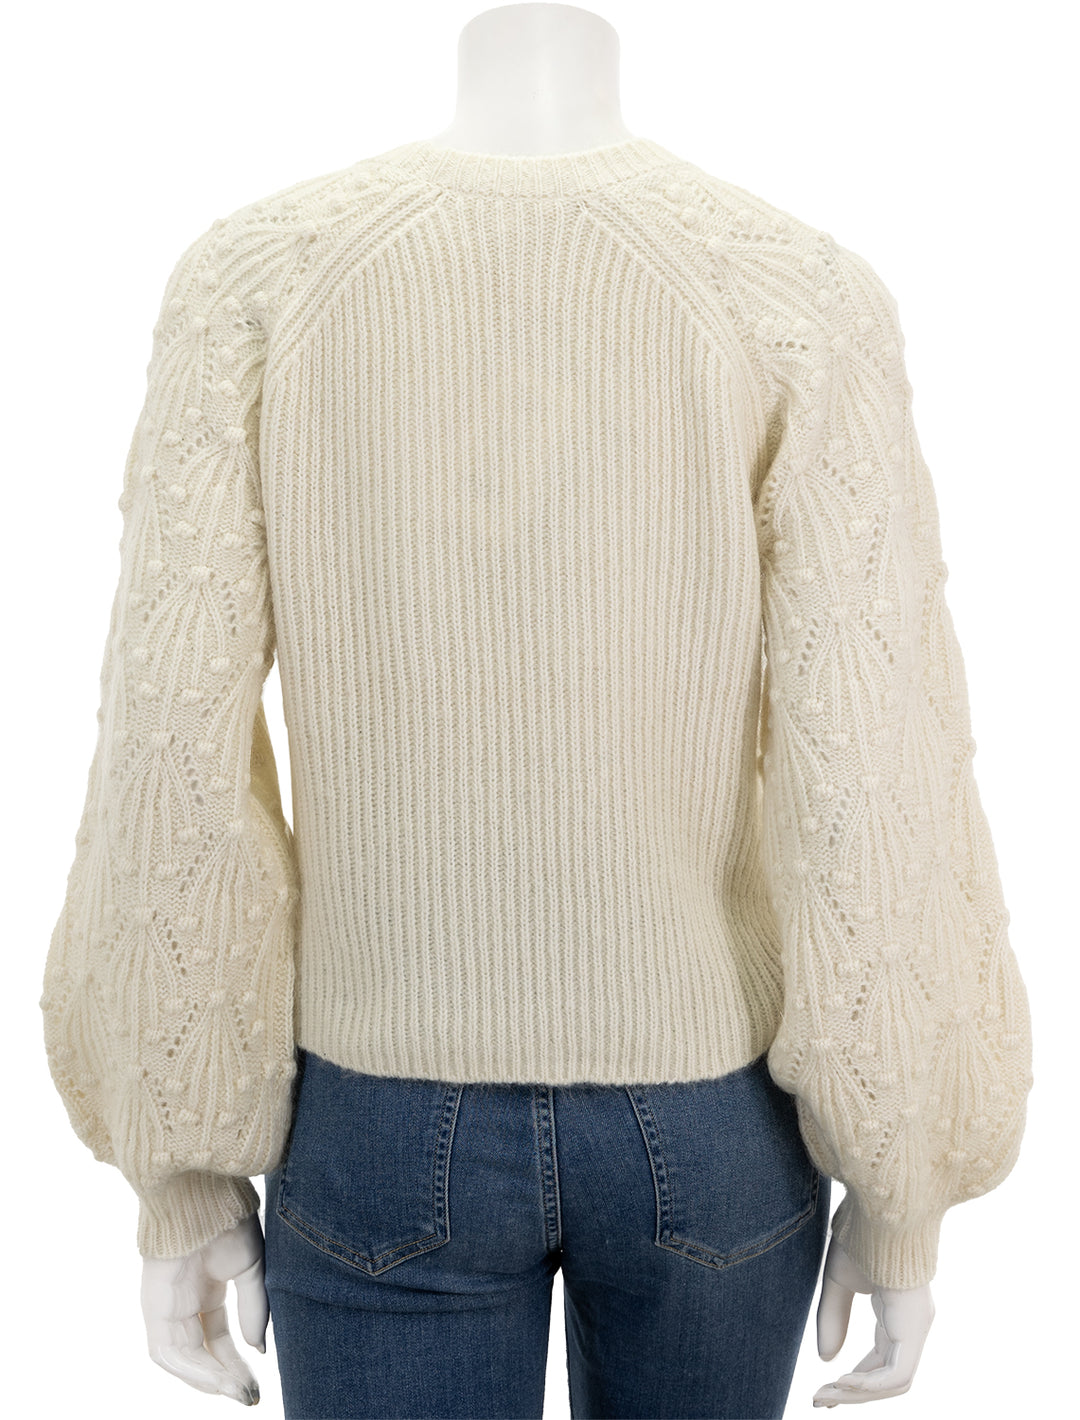 Back view of Splendid's rayne sweater in snow.